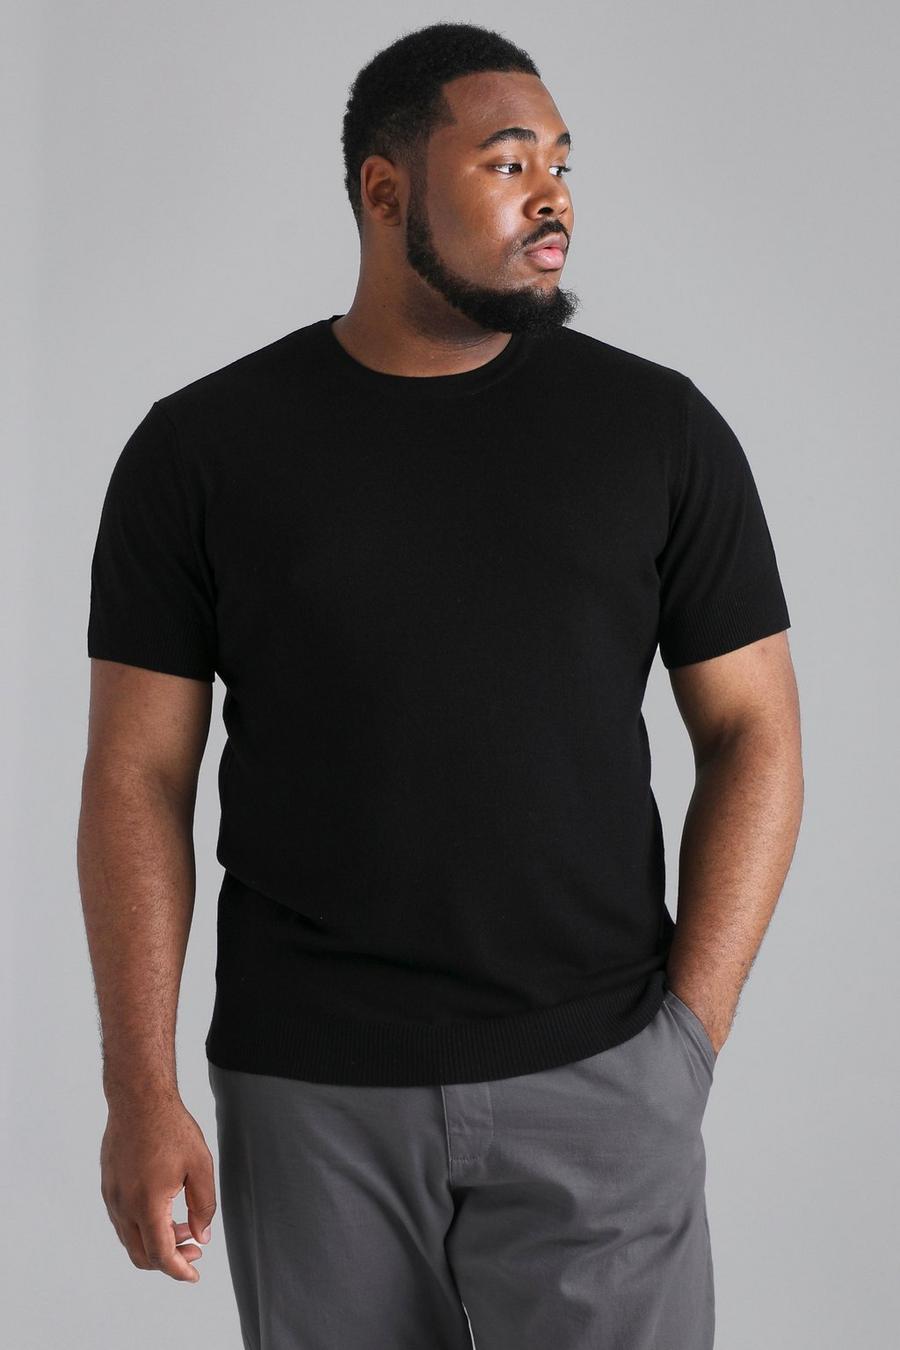 T-shirt Plus Size Basic in maglia riciclata, Black negro image number 1